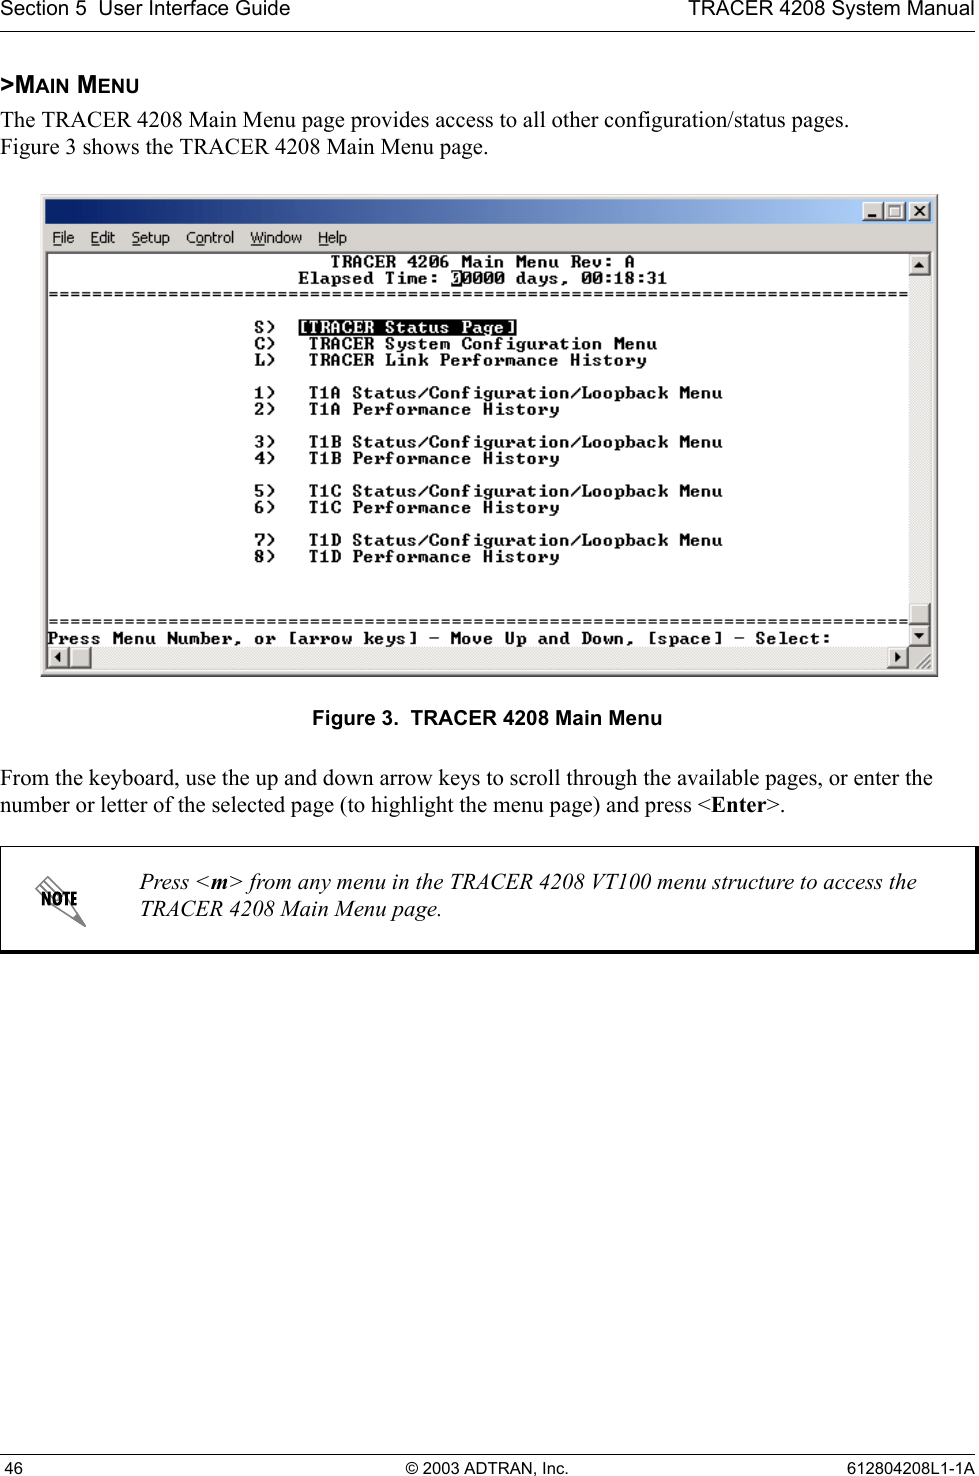 Section 5  User Interface Guide TRACER 4208 System Manual 46 © 2003 ADTRAN, Inc. 612804208L1-1A&gt;MAIN MENUThe TRACER 4208 Main Menu page provides access to all other configuration/status pages. Figure 3 shows the TRACER 4208 Main Menu page.Figure 3.  TRACER 4208 Main MenuFrom the keyboard, use the up and down arrow keys to scroll through the available pages, or enter the number or letter of the selected page (to highlight the menu page) and press &lt;Enter&gt;.Press &lt;m&gt; from any menu in the TRACER 4208 VT100 menu structure to access the TRACER 4208 Main Menu page.